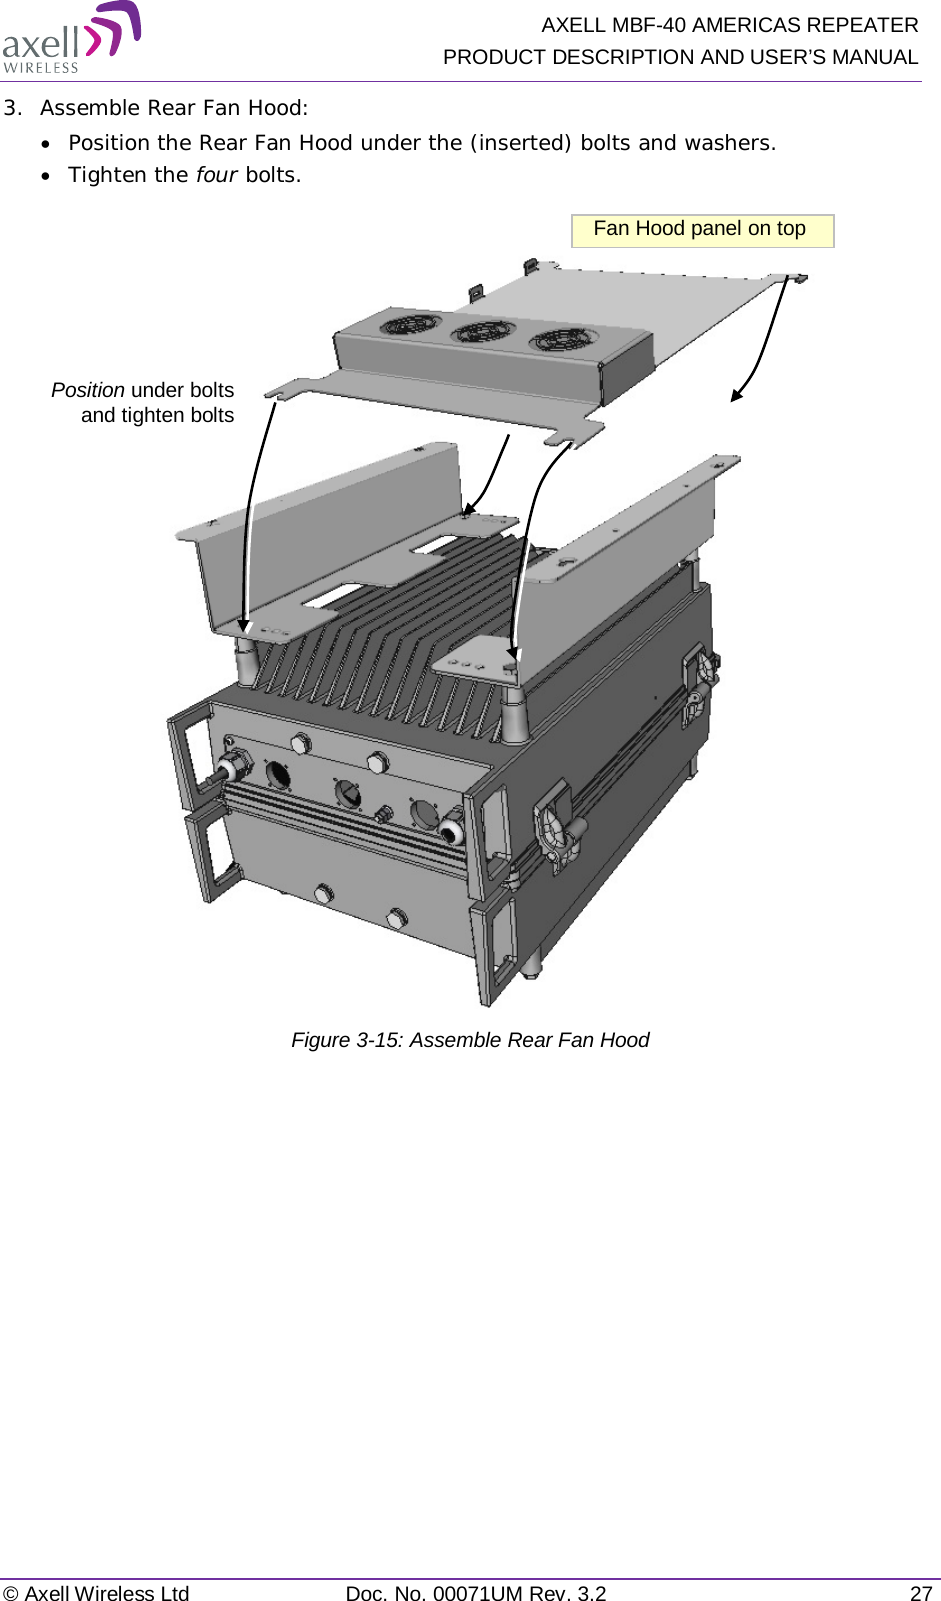   AXELL MBF-40 AMERICAS REPEATER PRODUCT DESCRIPTION AND USER’S MANUAL © Axell Wireless Ltd Doc. No. 00071UM Rev. 3.2 27 3.  Assemble Rear Fan Hood: • Position the Rear Fan Hood under the (inserted) bolts and washers. • Tighten the four bolts.   Figure  3-15: Assemble Rear Fan Hood   Position under bolts  and tighten bolts Fan Hood panel on top 